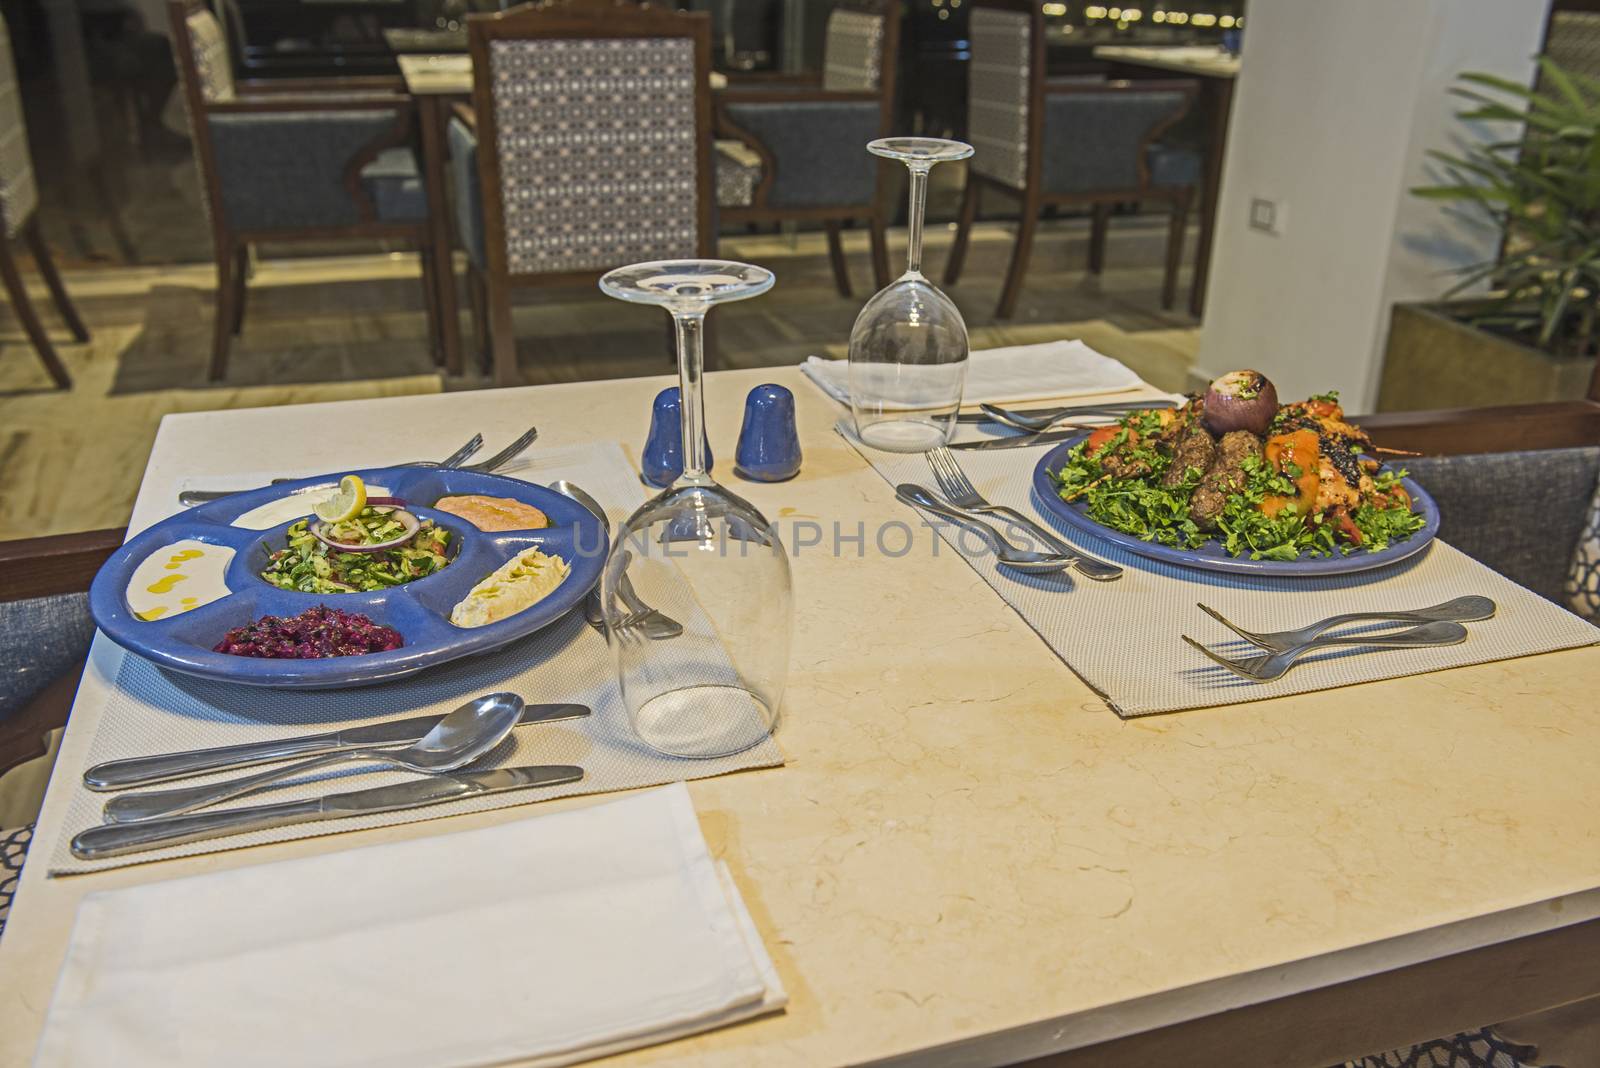 Oriental mixed grill meal and meze salad dish in a la carte hotel restaurant with wine glasses